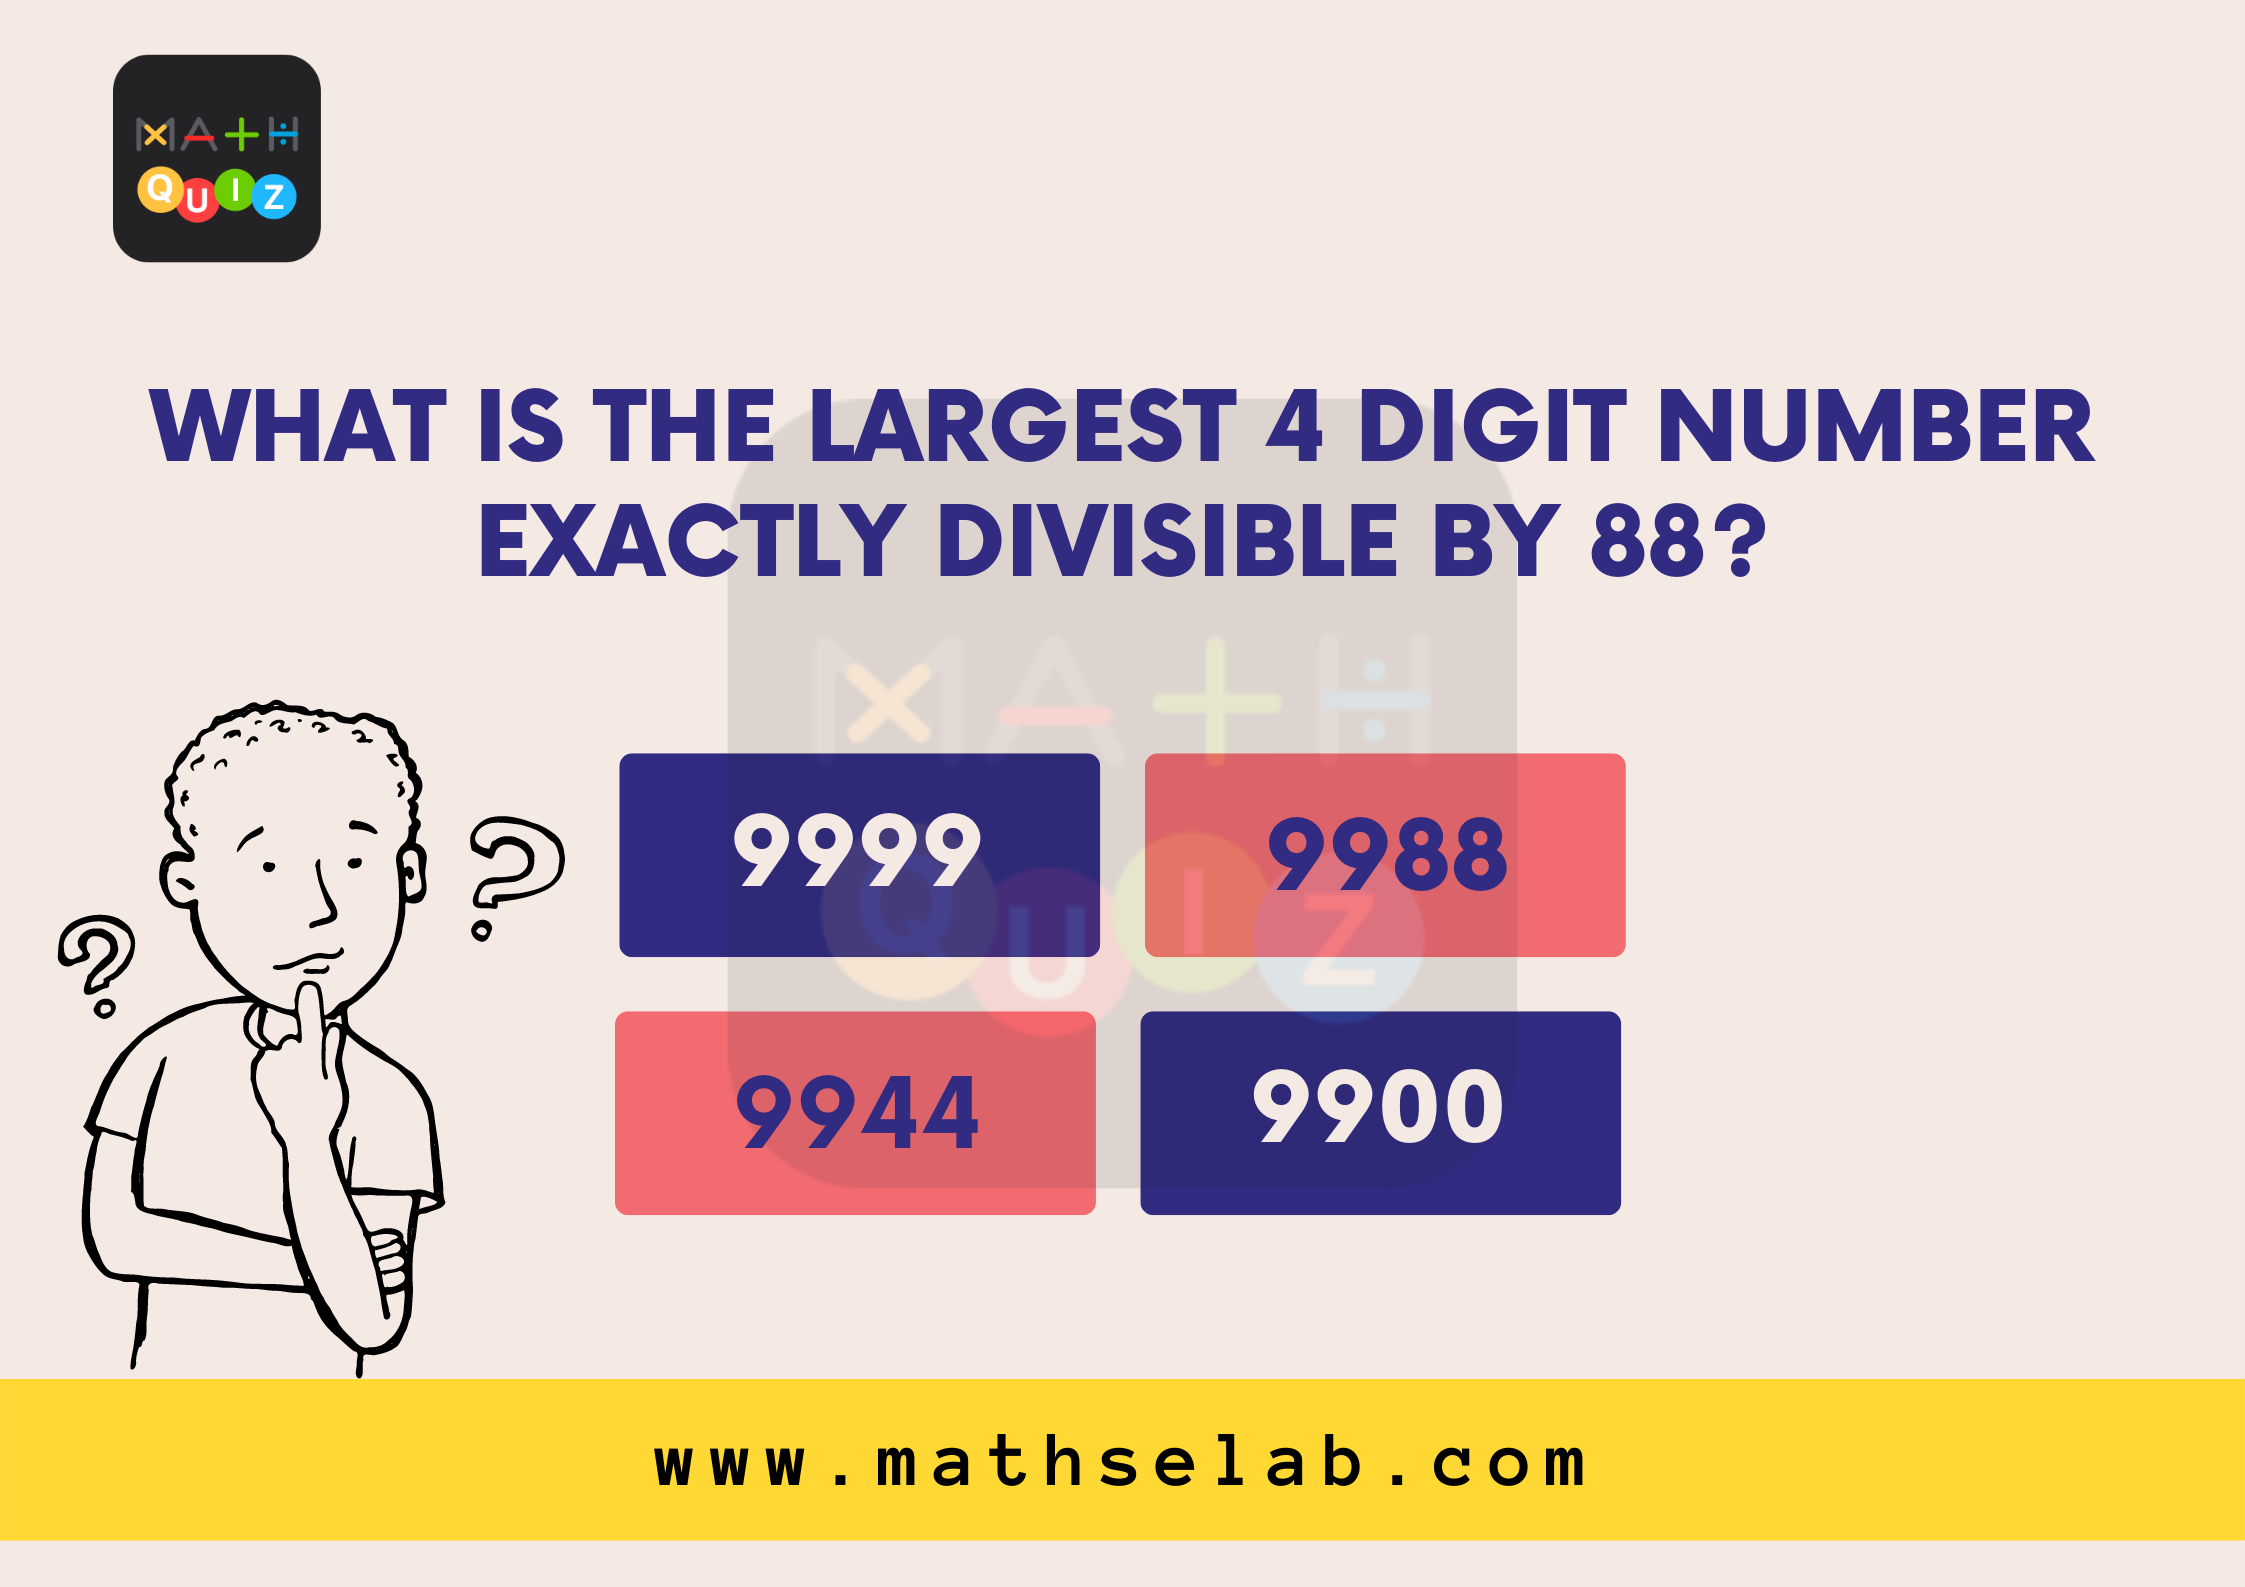 What is the largest 4 digit number exactly divisible by 88?